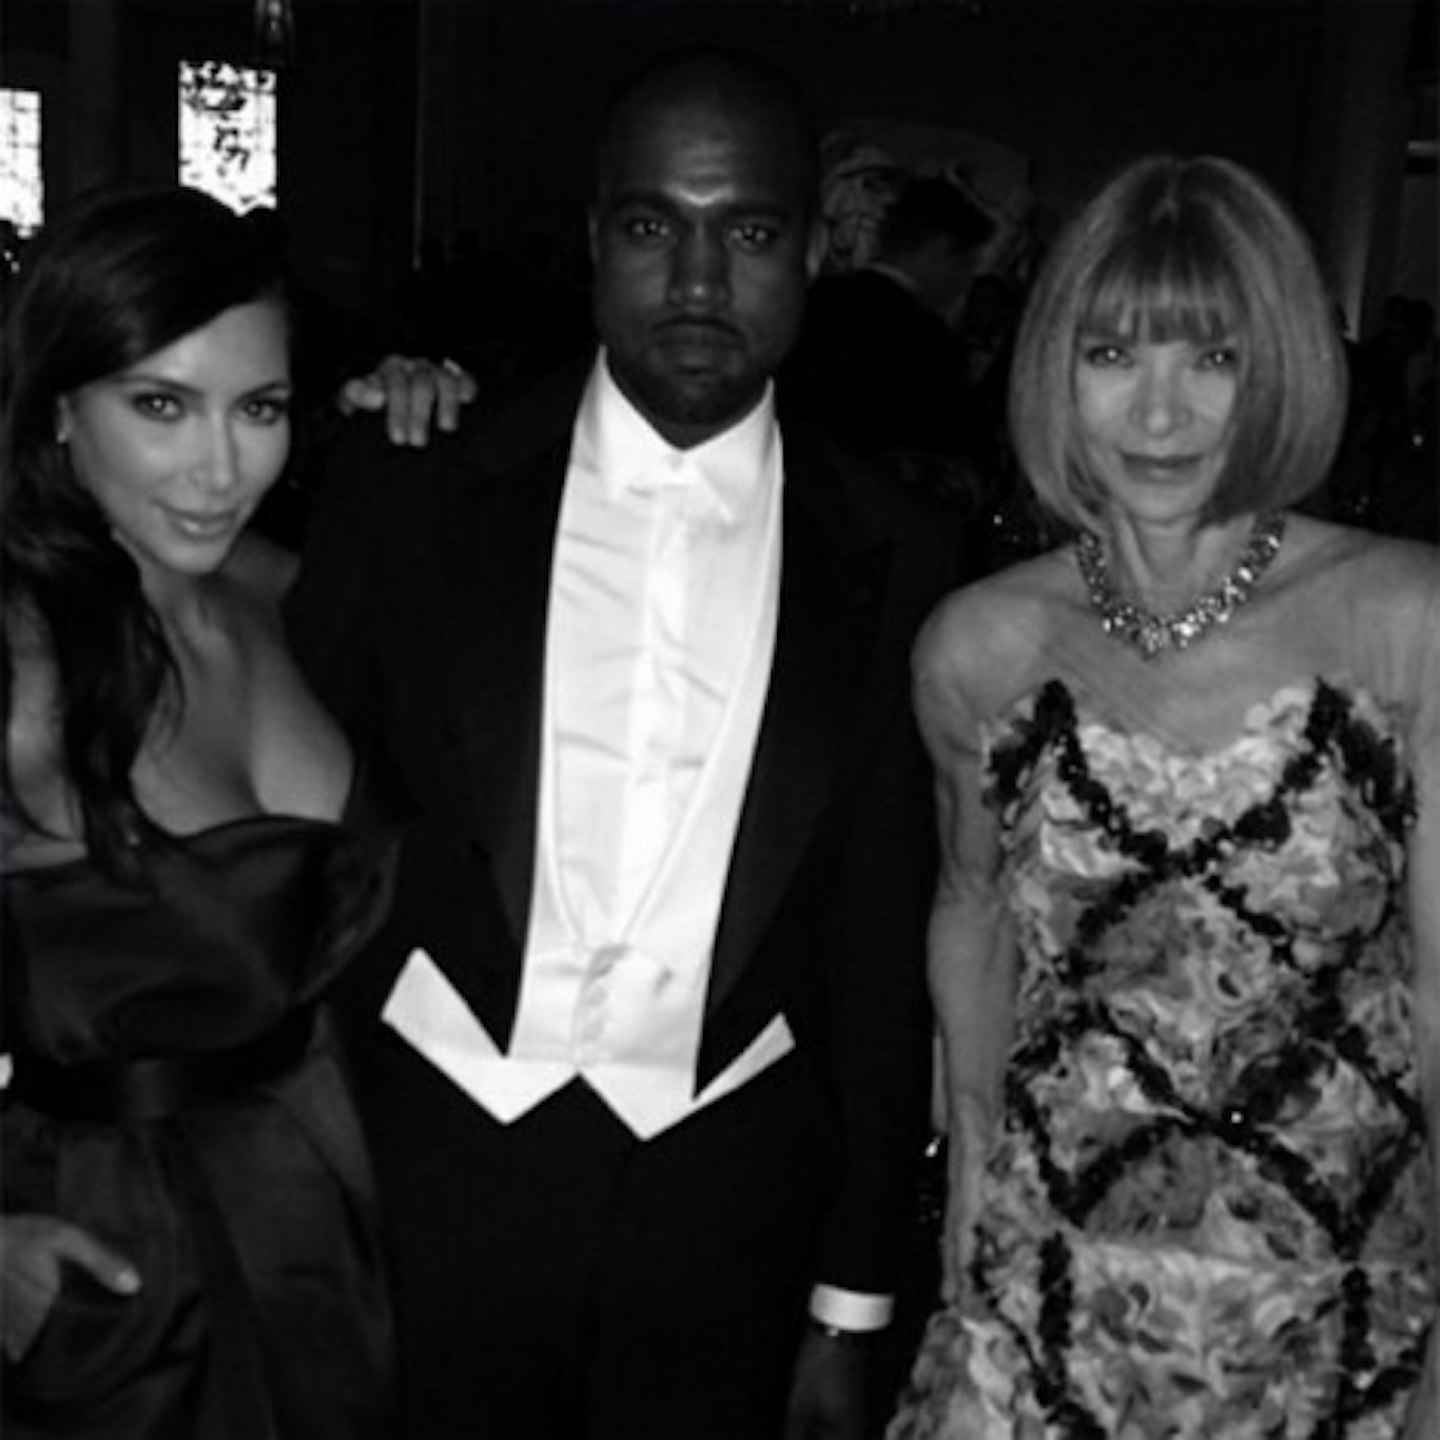 Kim documented her night on social media - including a snap with the organiser, Anna Wintour